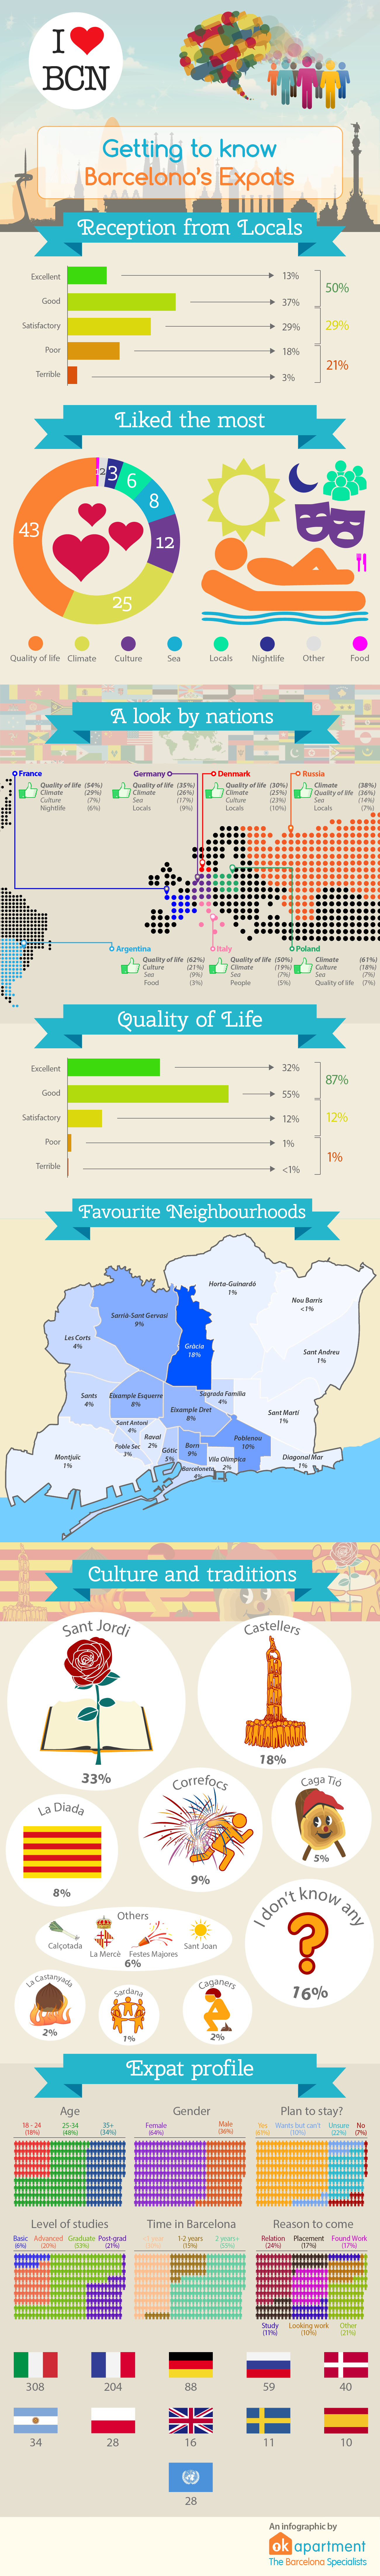 (Survey + Infographic) what expats living in Barcelona like about the city